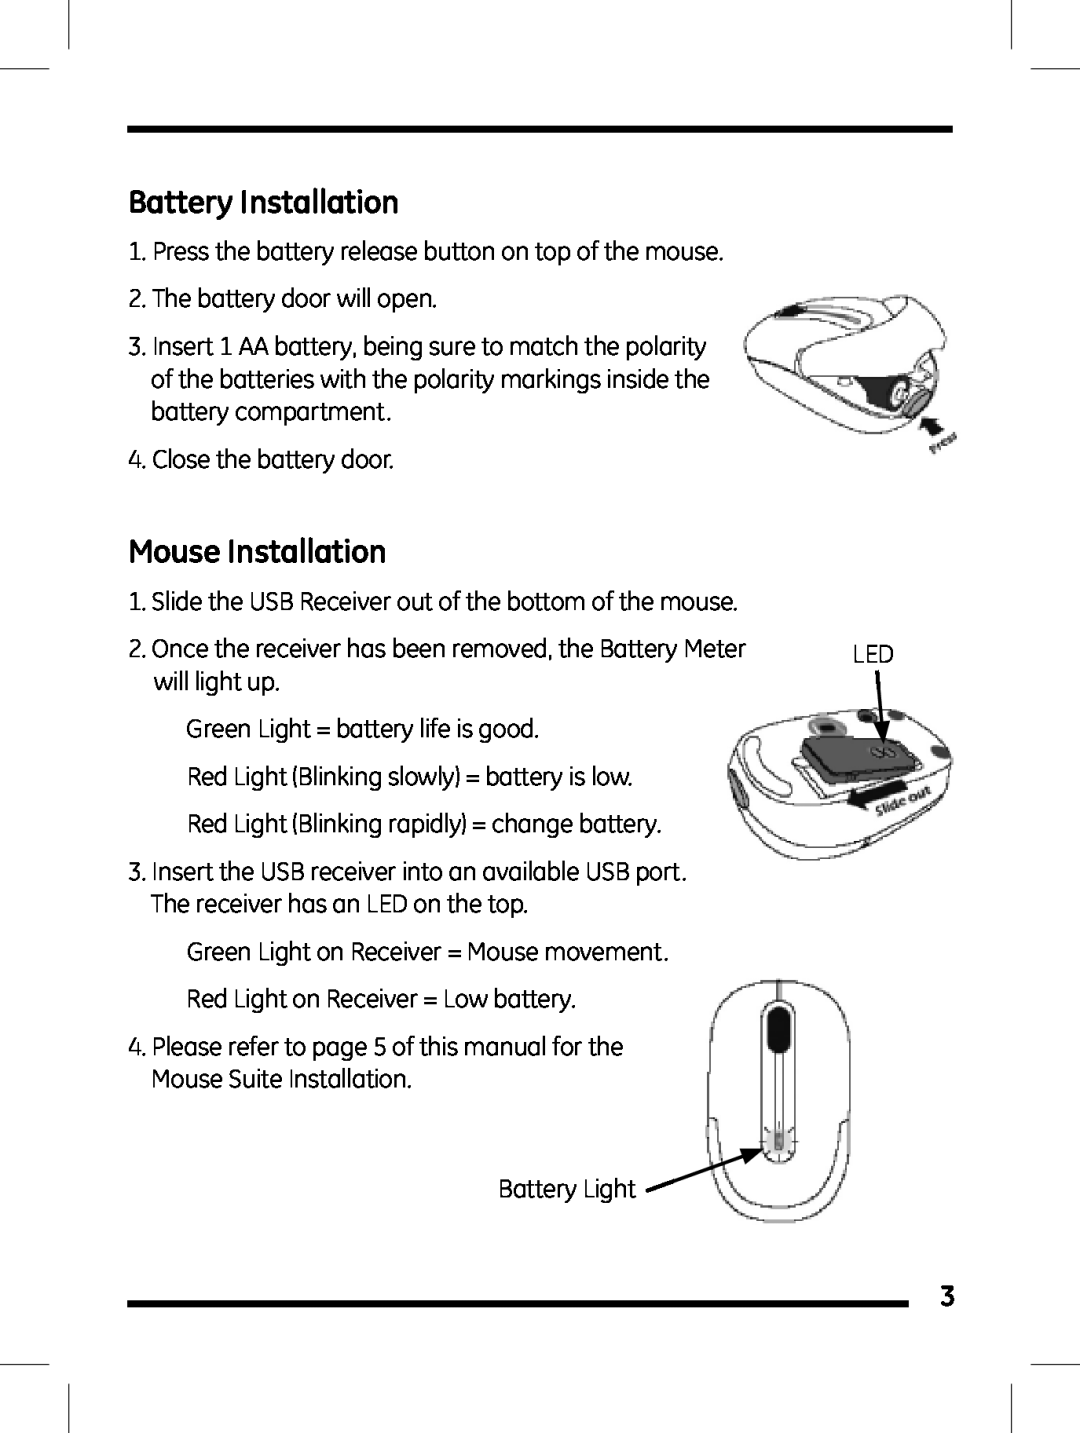 GE 98504 instruction manual Battery Installation, Mouse Installation 